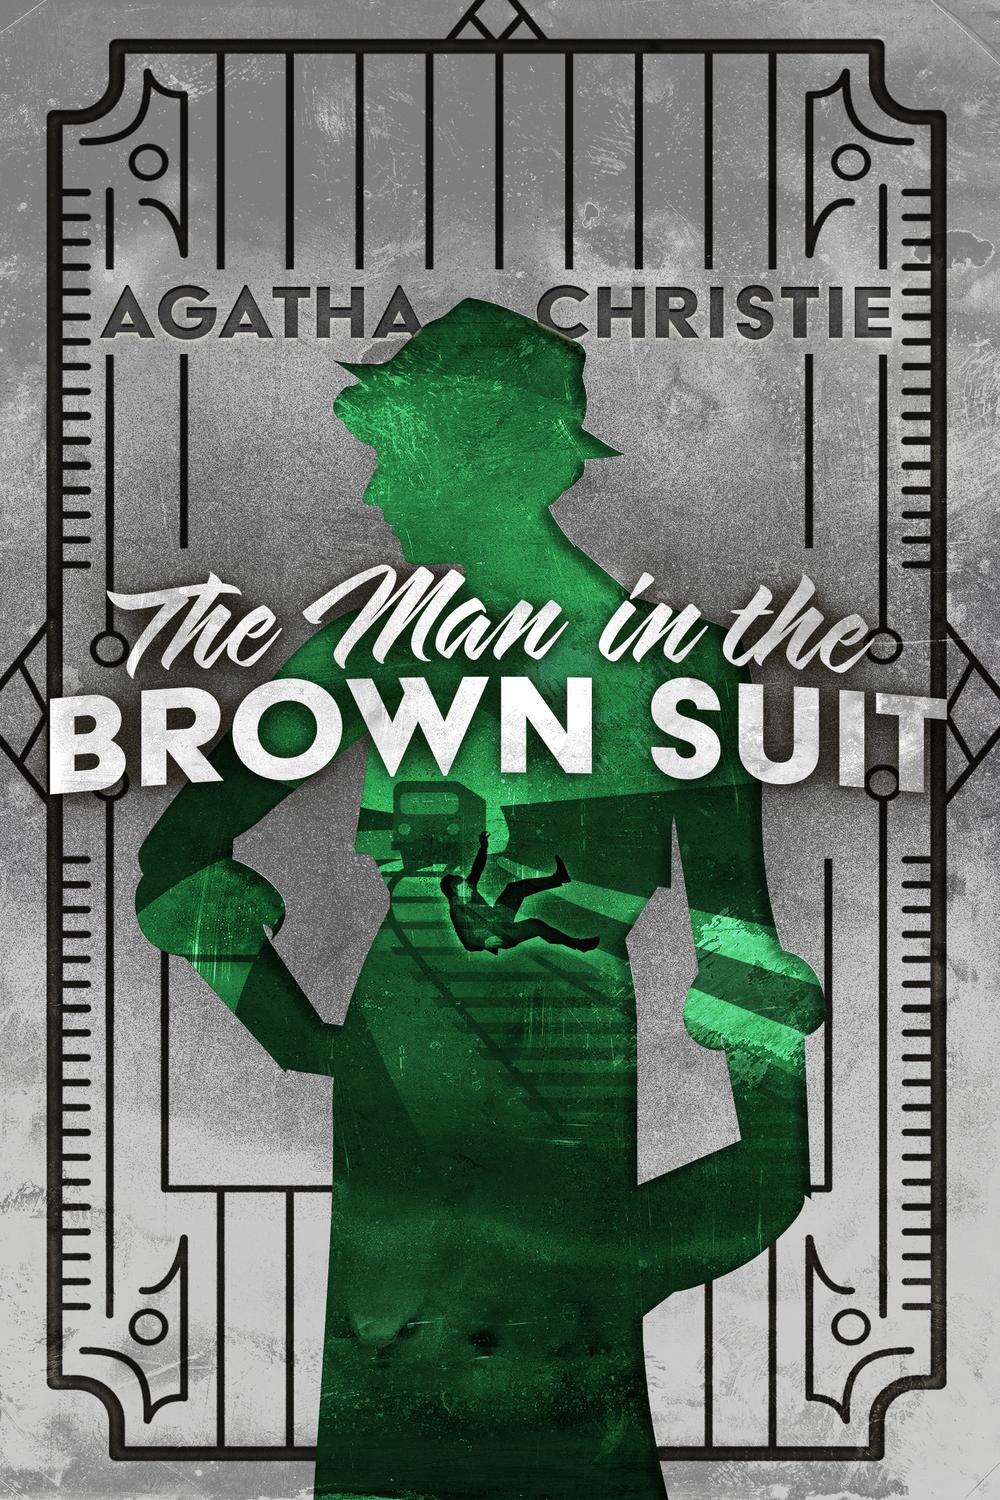 The Man in the Brown Suit - Agatha Christie,,